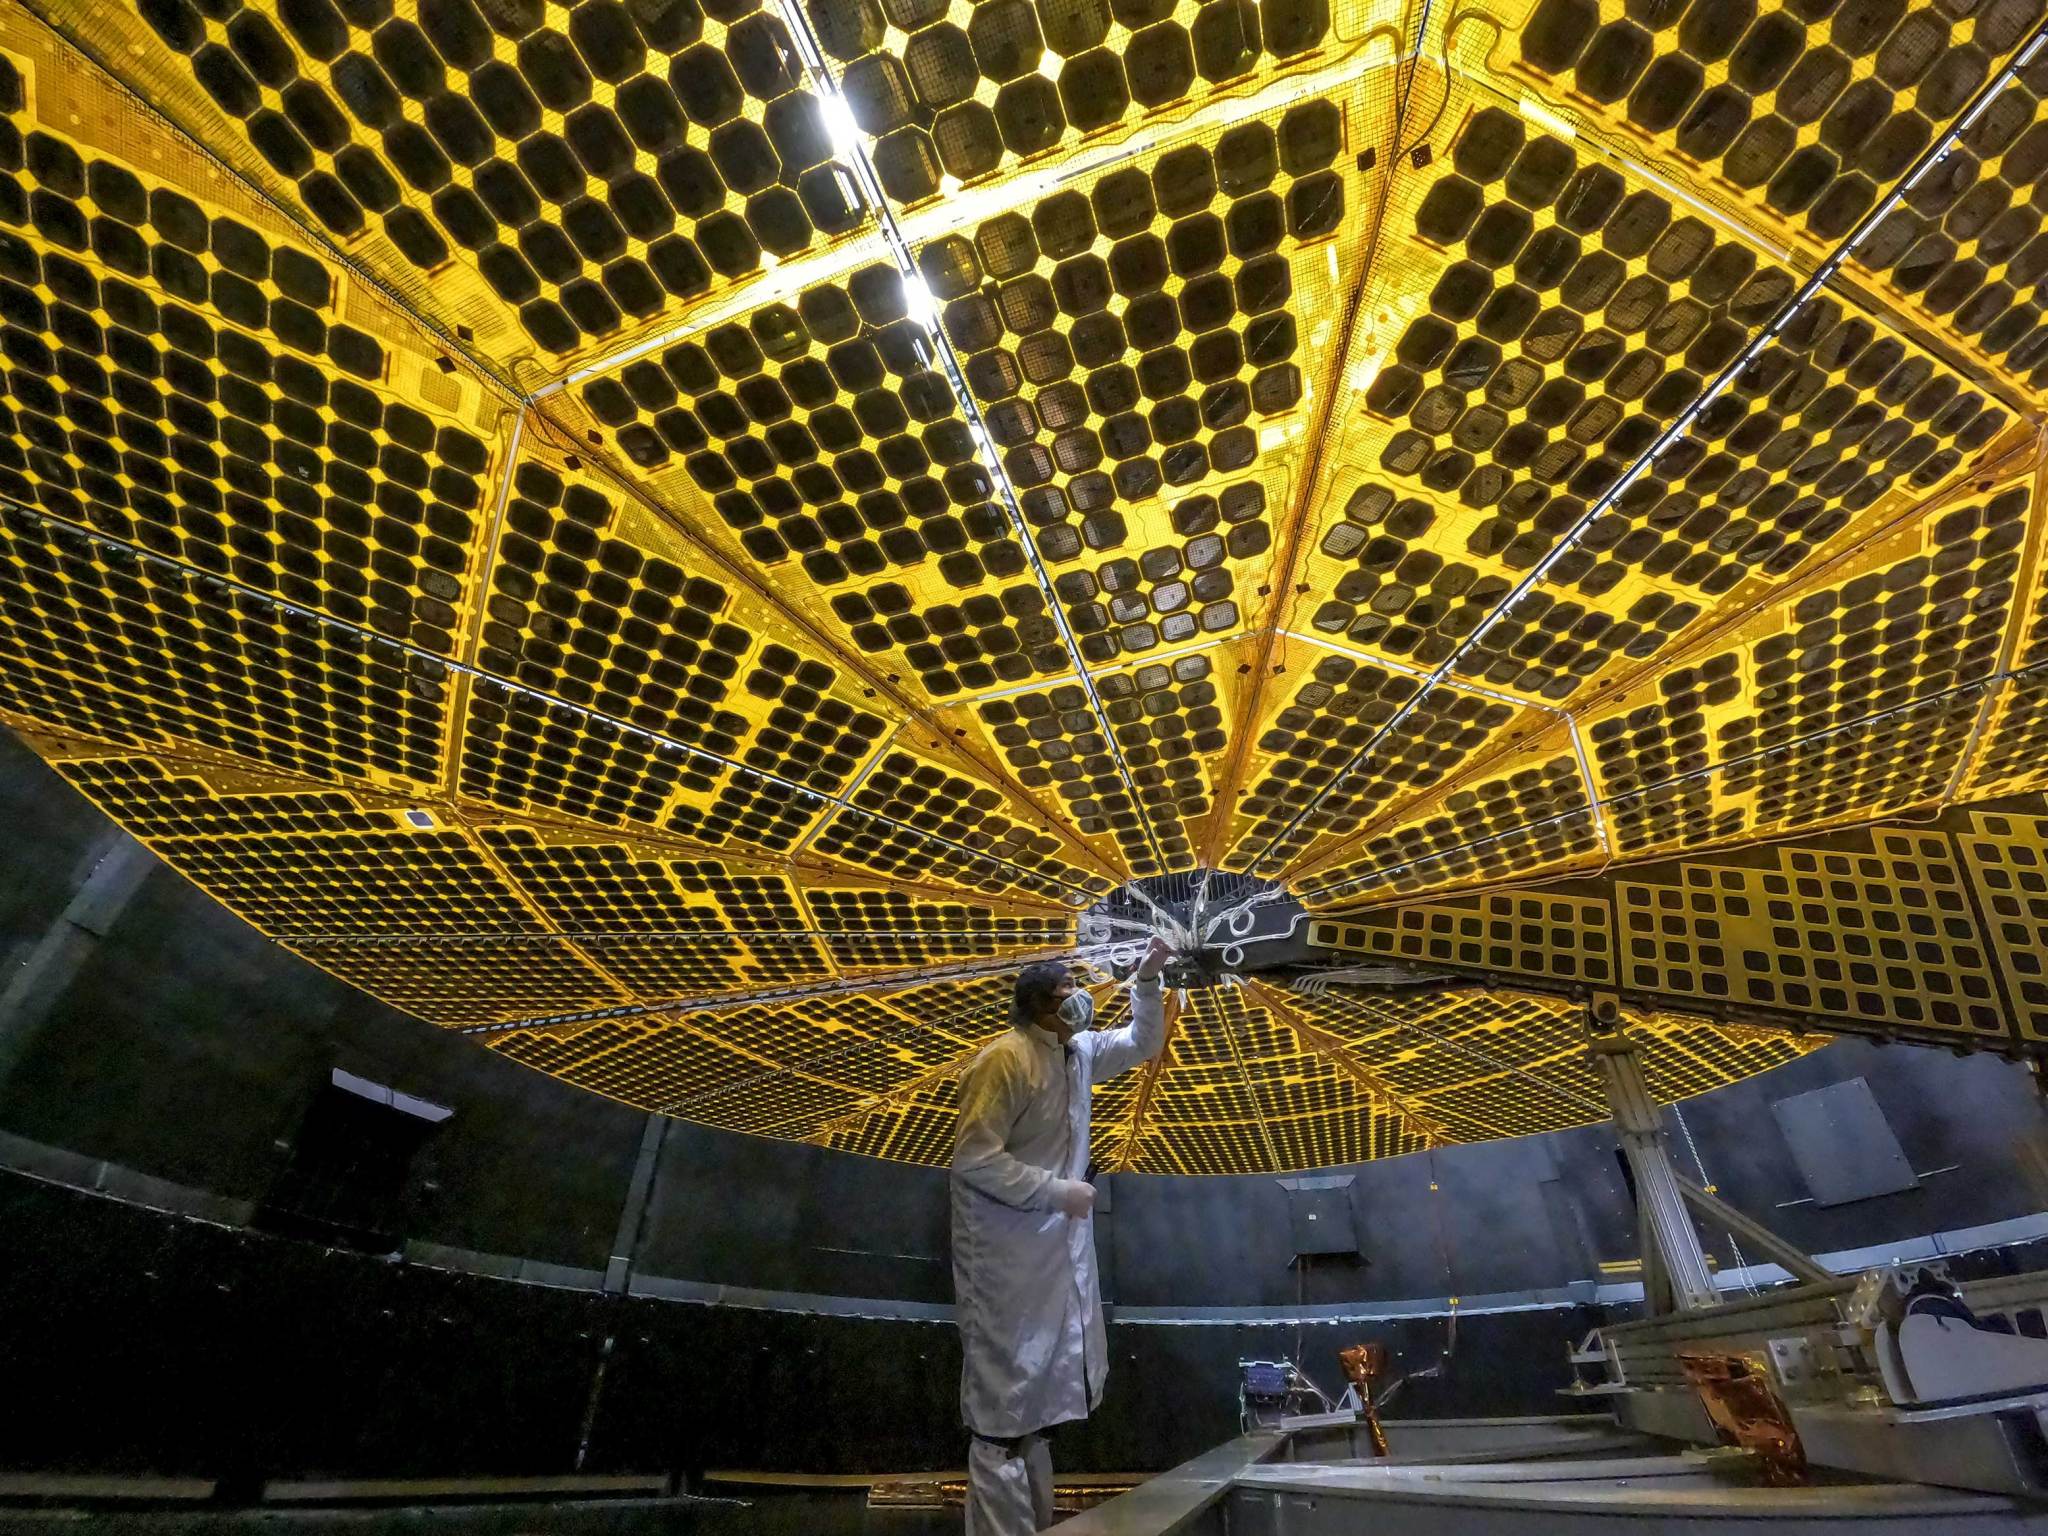 Lucy's solar panels extended to form a flat circle of yellowish panel, with small gold circles covering the surface. The panel is open high in the air, like an umbrella. A person in a clean room stands below the